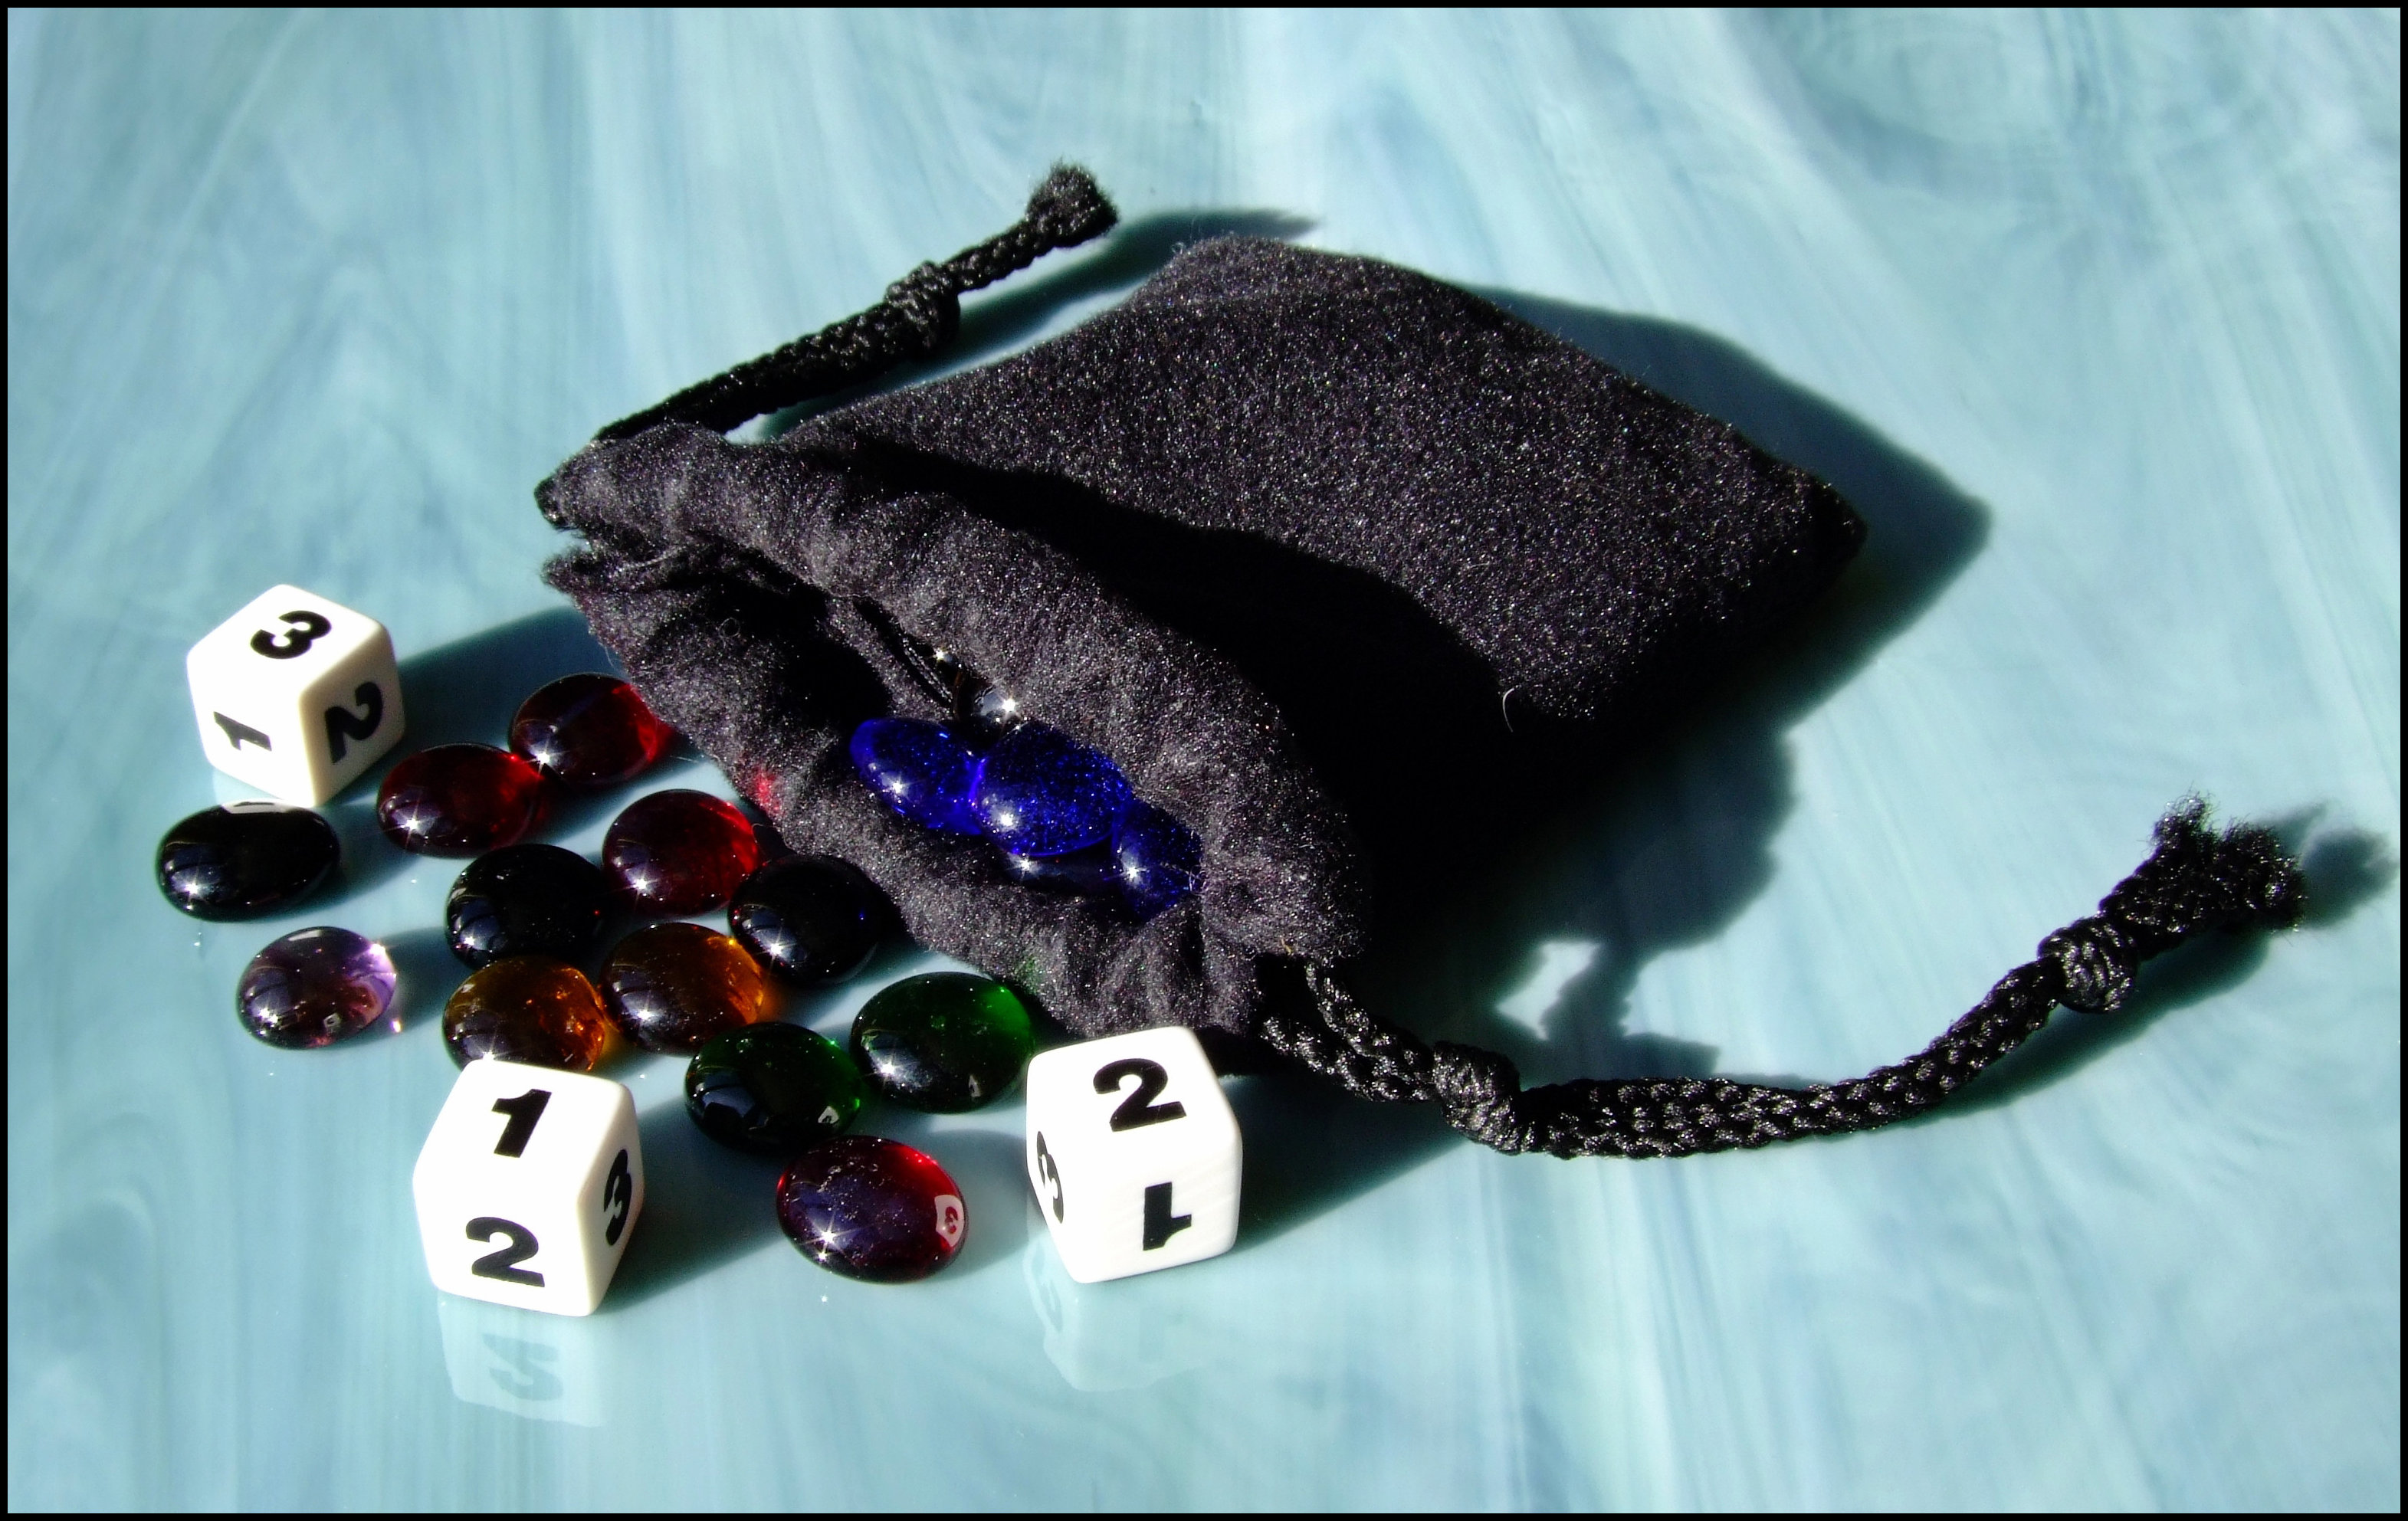 Mage Stones - Some Game Components